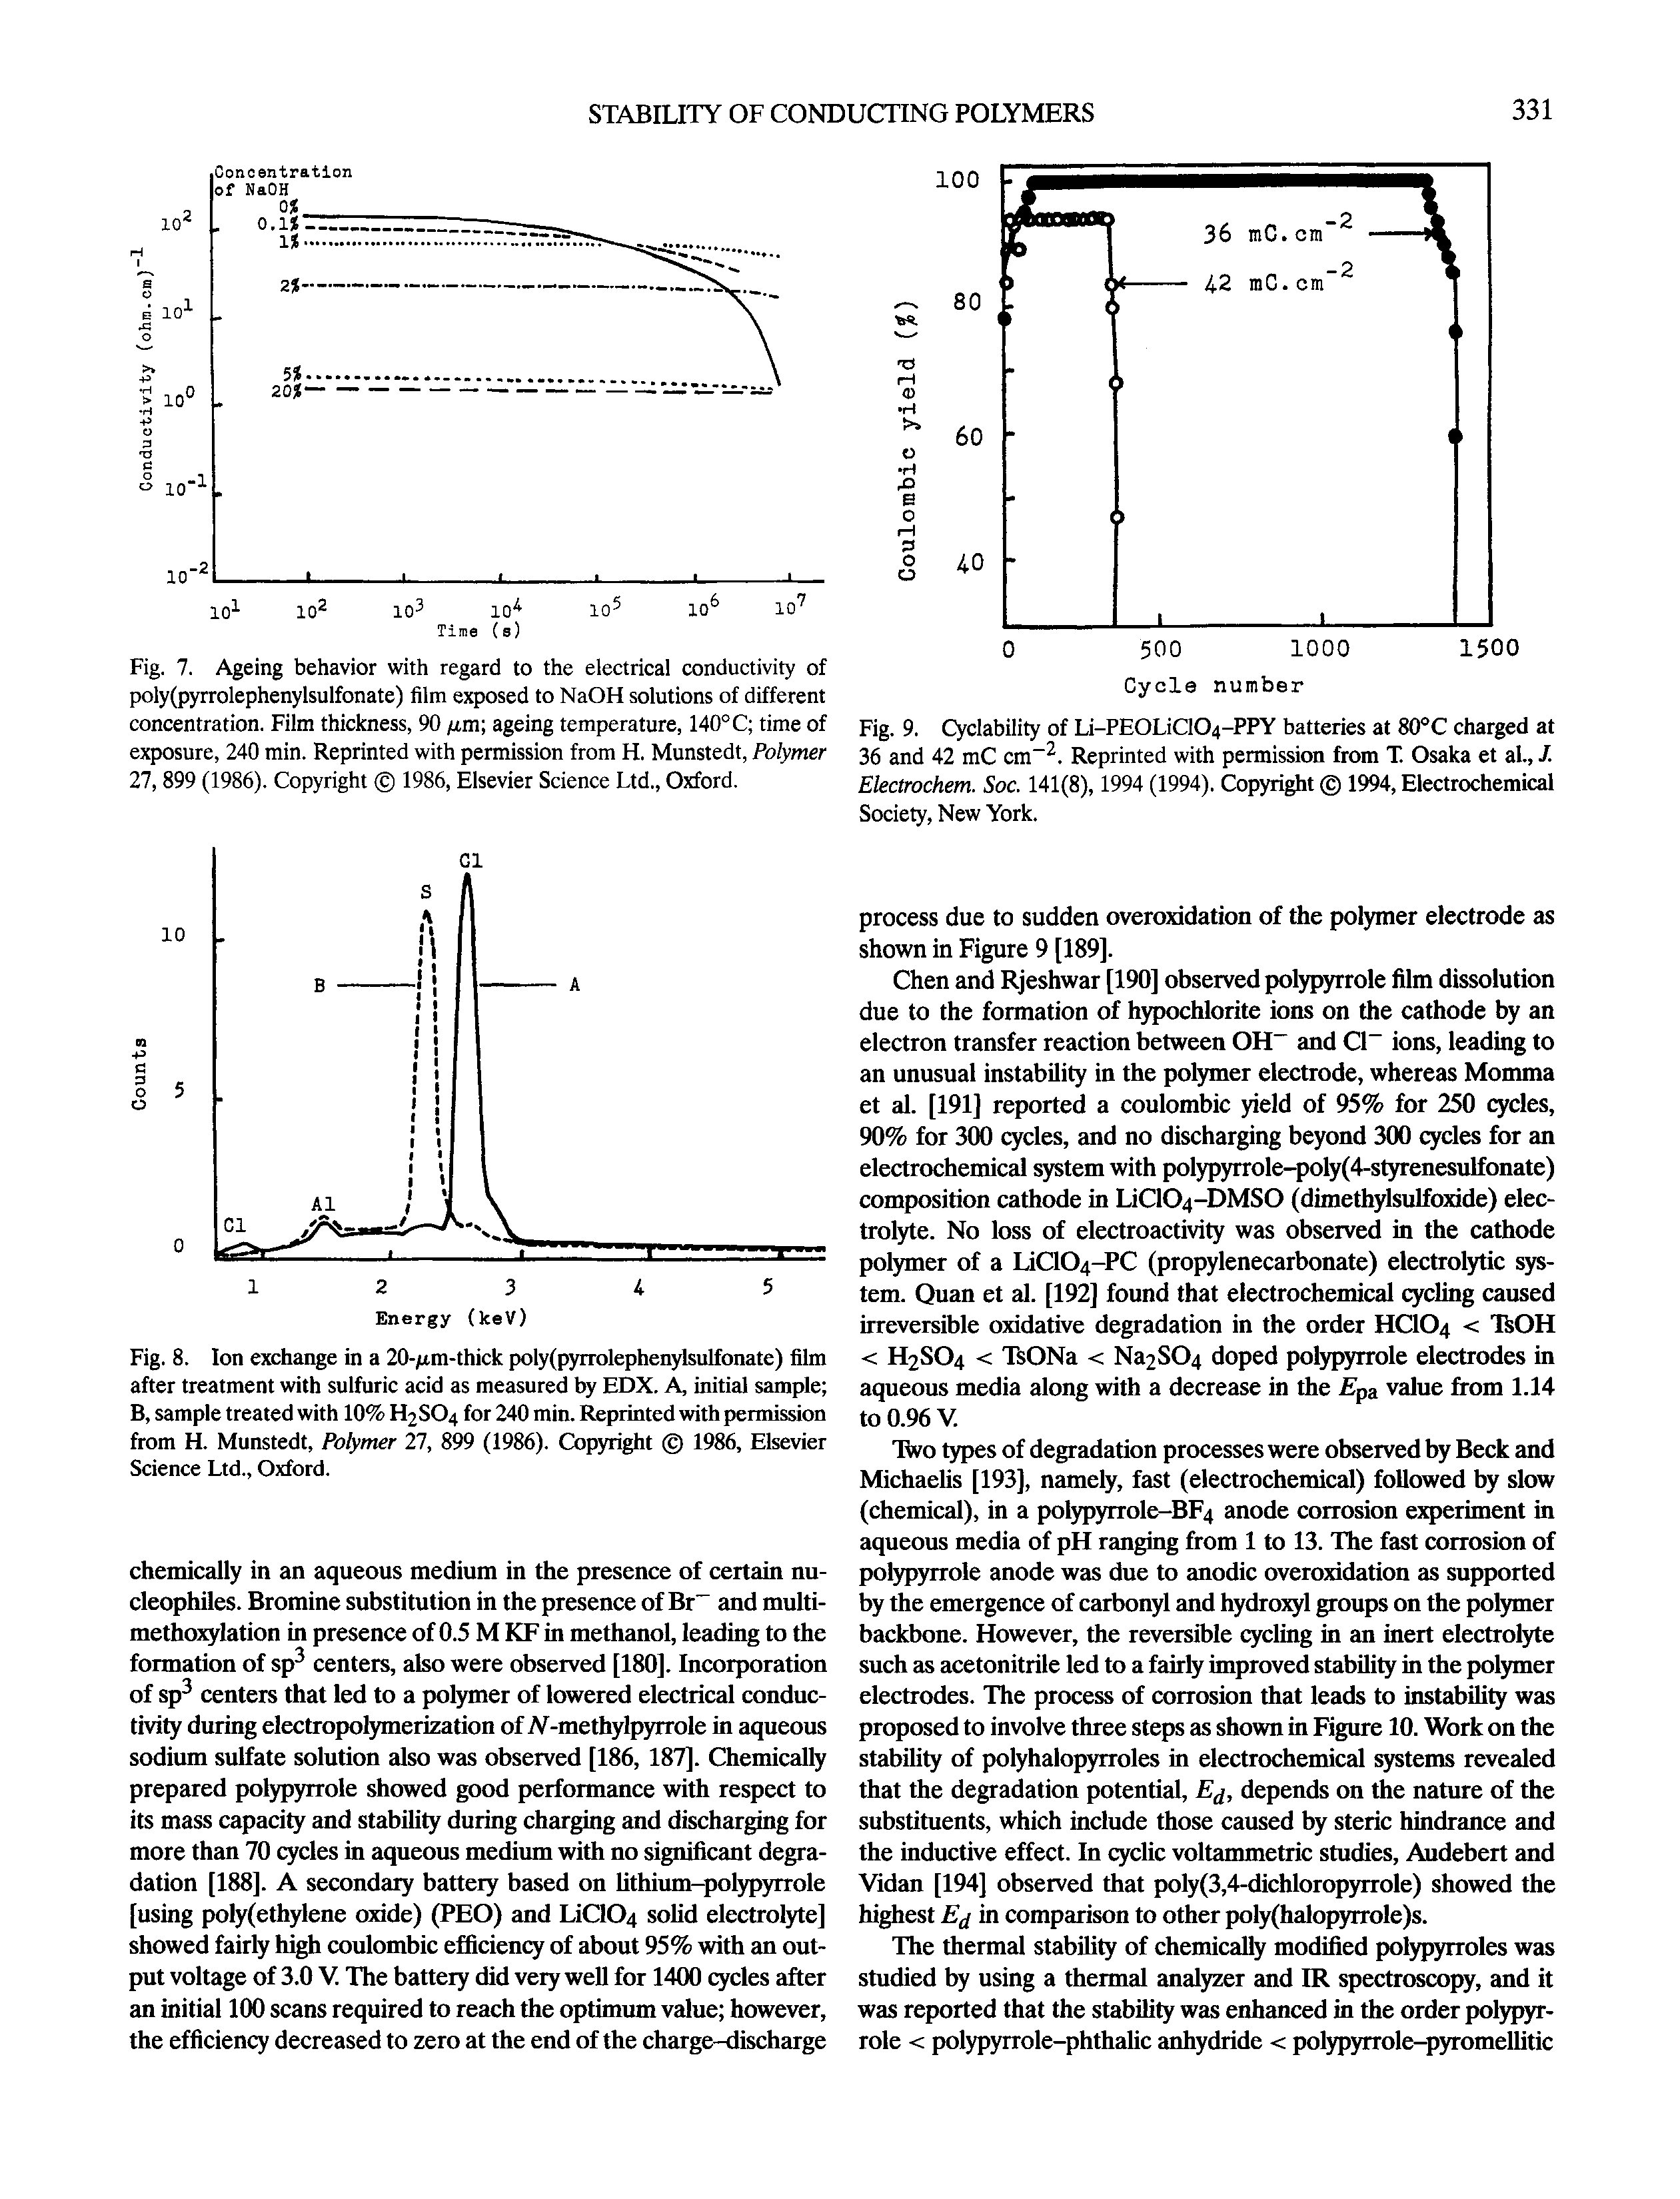 Fig. 7. Ageing behavior with regard to the electrical conductivity of poly(pyrrolephenylsulfonate) film exposed to NaOH solutions of different concentration. Film thickness, 90 /xm ageing temperature, 140°C time of exposure, 240 min. Reprinted with permission from H. Munstedt, Polymer 27, 899 (1986). Copyright 1986, Elsevier Science Ltd., Oxford.